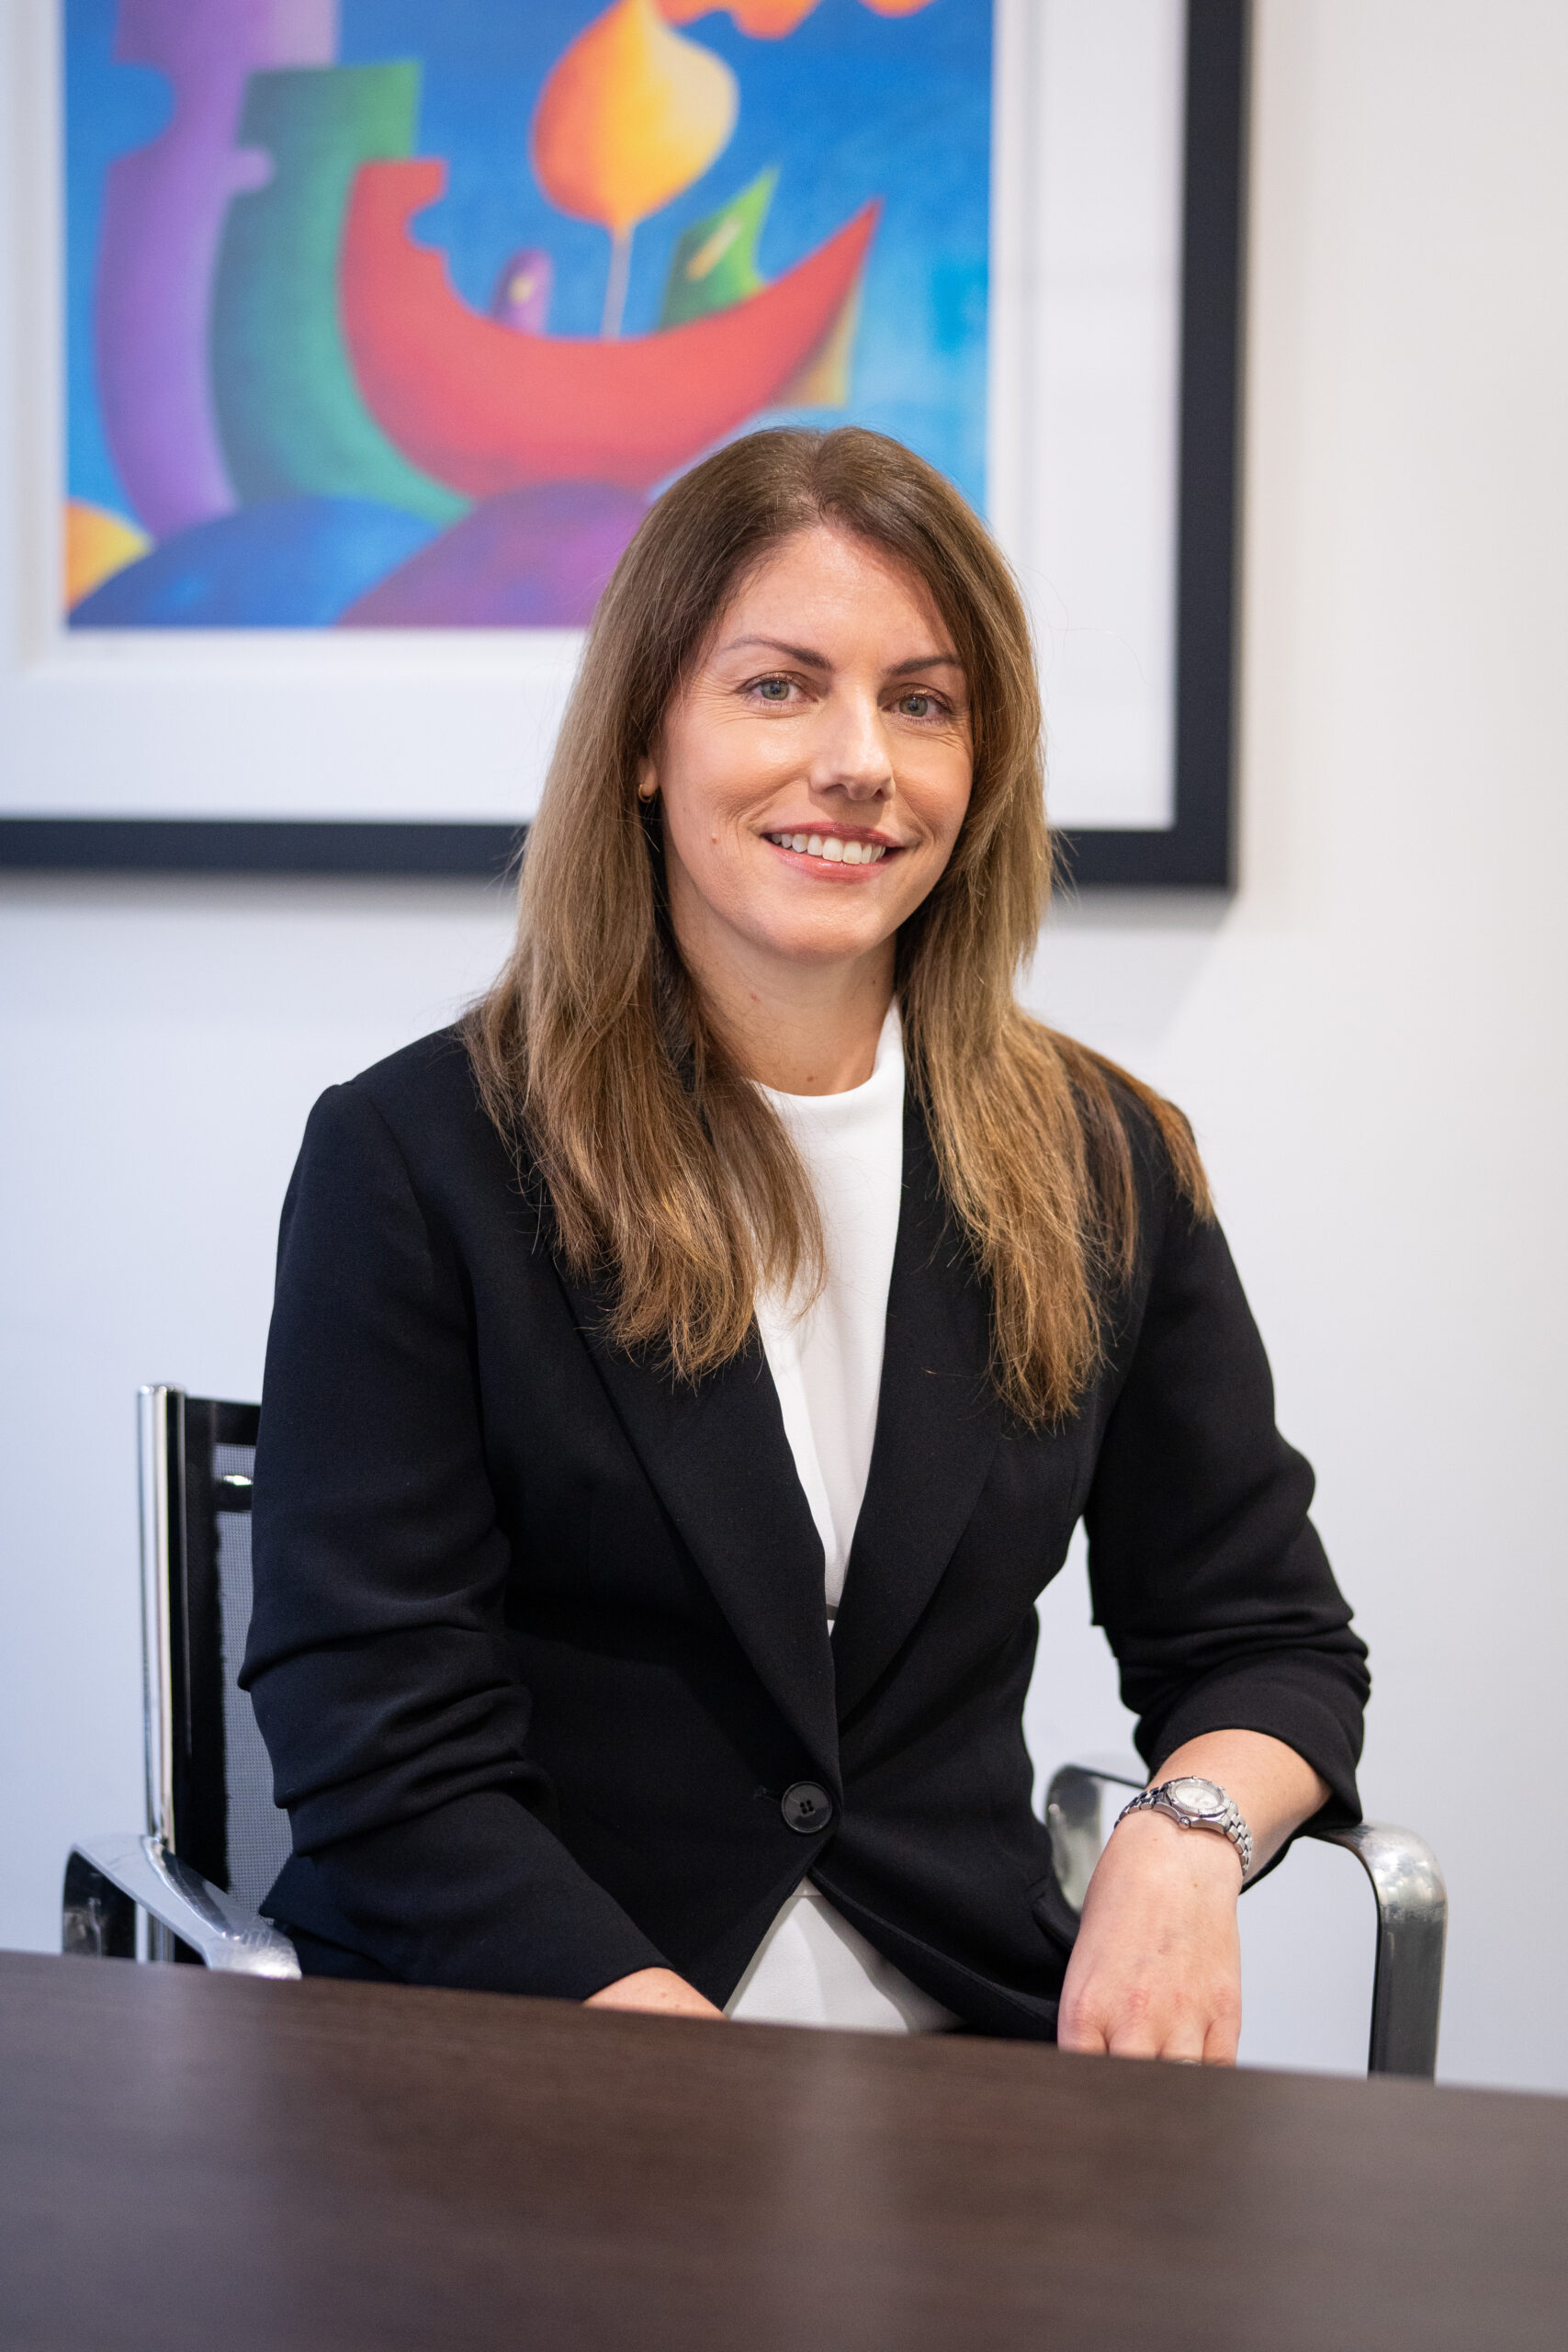 Photograph of Rachael O'Shaughnessy, Partner specialising in medical negligence and personal injury law